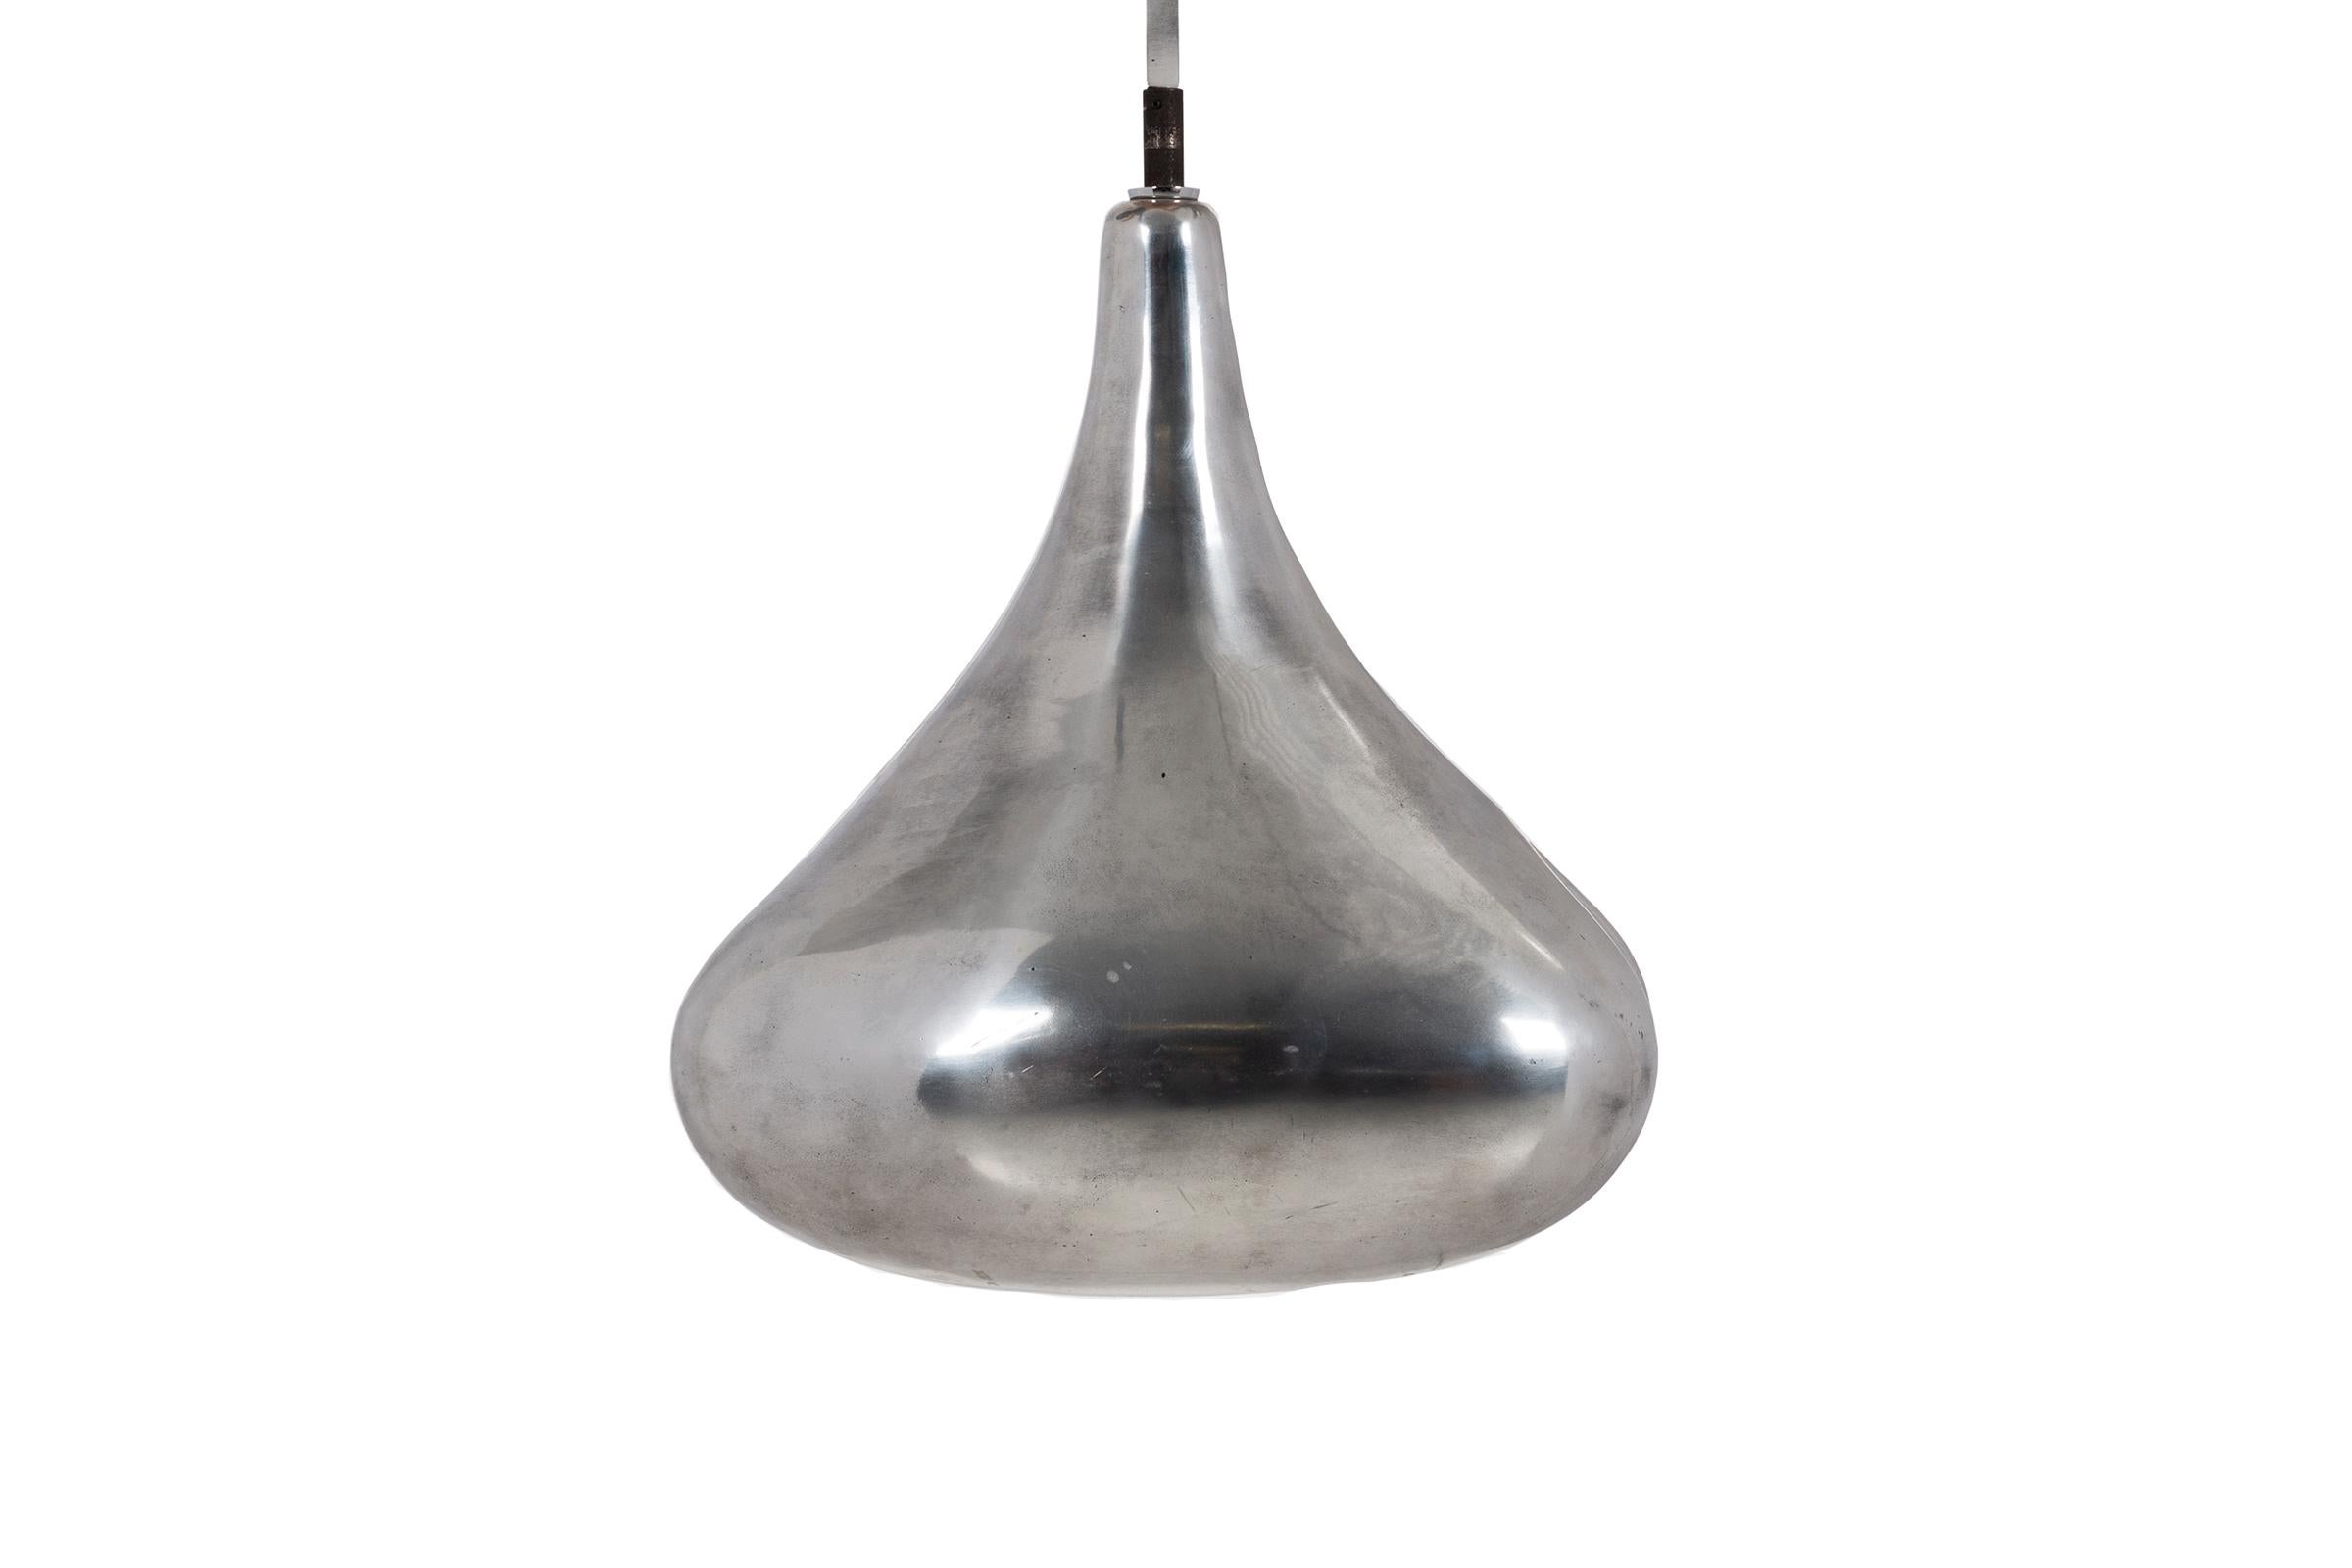 Chicago based acclaimed architect Jordan Mozer, known for couture interiors of restaurants and boutique hotels, these pendants from Bob San restaurant, Chicago.
Cast aluminum polished exterior with painted internal structure leaves a dramatic